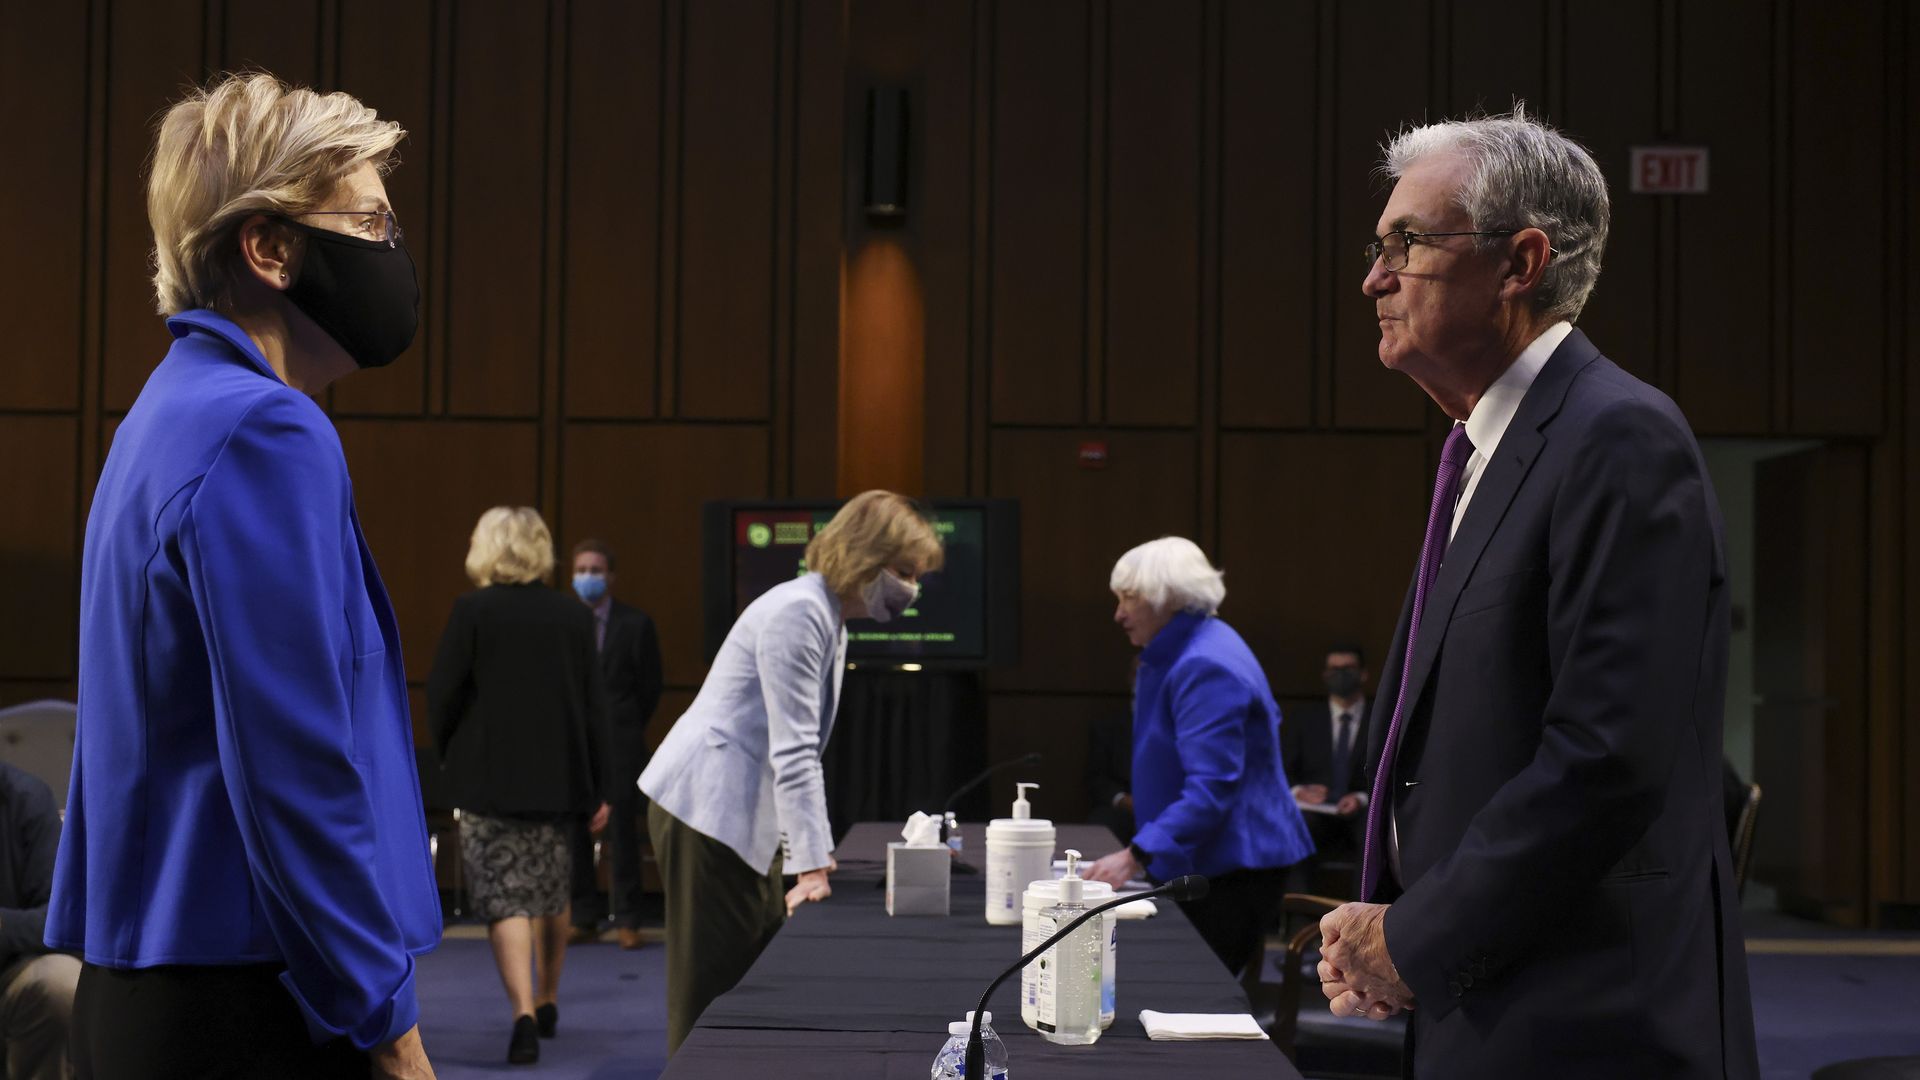 enator Elizabeth Warren, a Democrat from Massachusetts, left, speaks with Jerome Powell, chairman of the U.S. Federal Reserve, during a Senate Banking, Housing and Urban Affairs Committee hearing in Washington, D.C., U.S